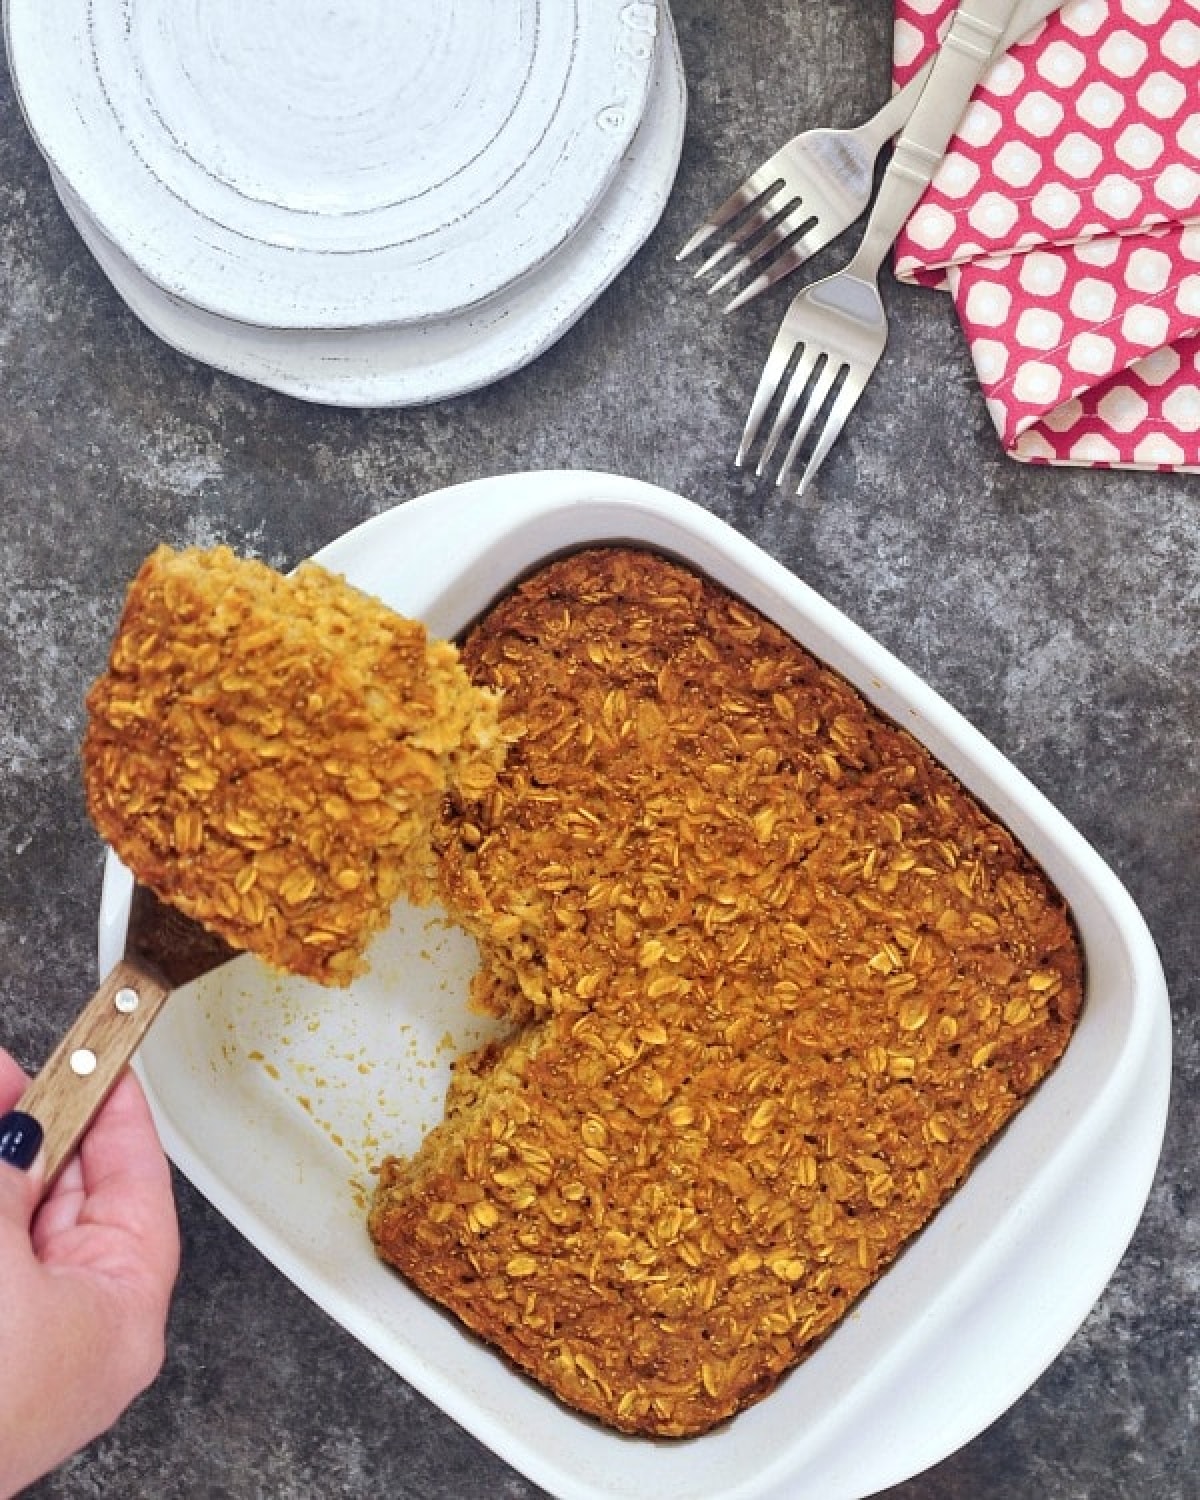 A white ceramic baking pan of baked pumpkin oatmeal, a stack of plates and forks on the side. A hand holding a small spatula is taking one square slice of oatmeal from the baking dish.